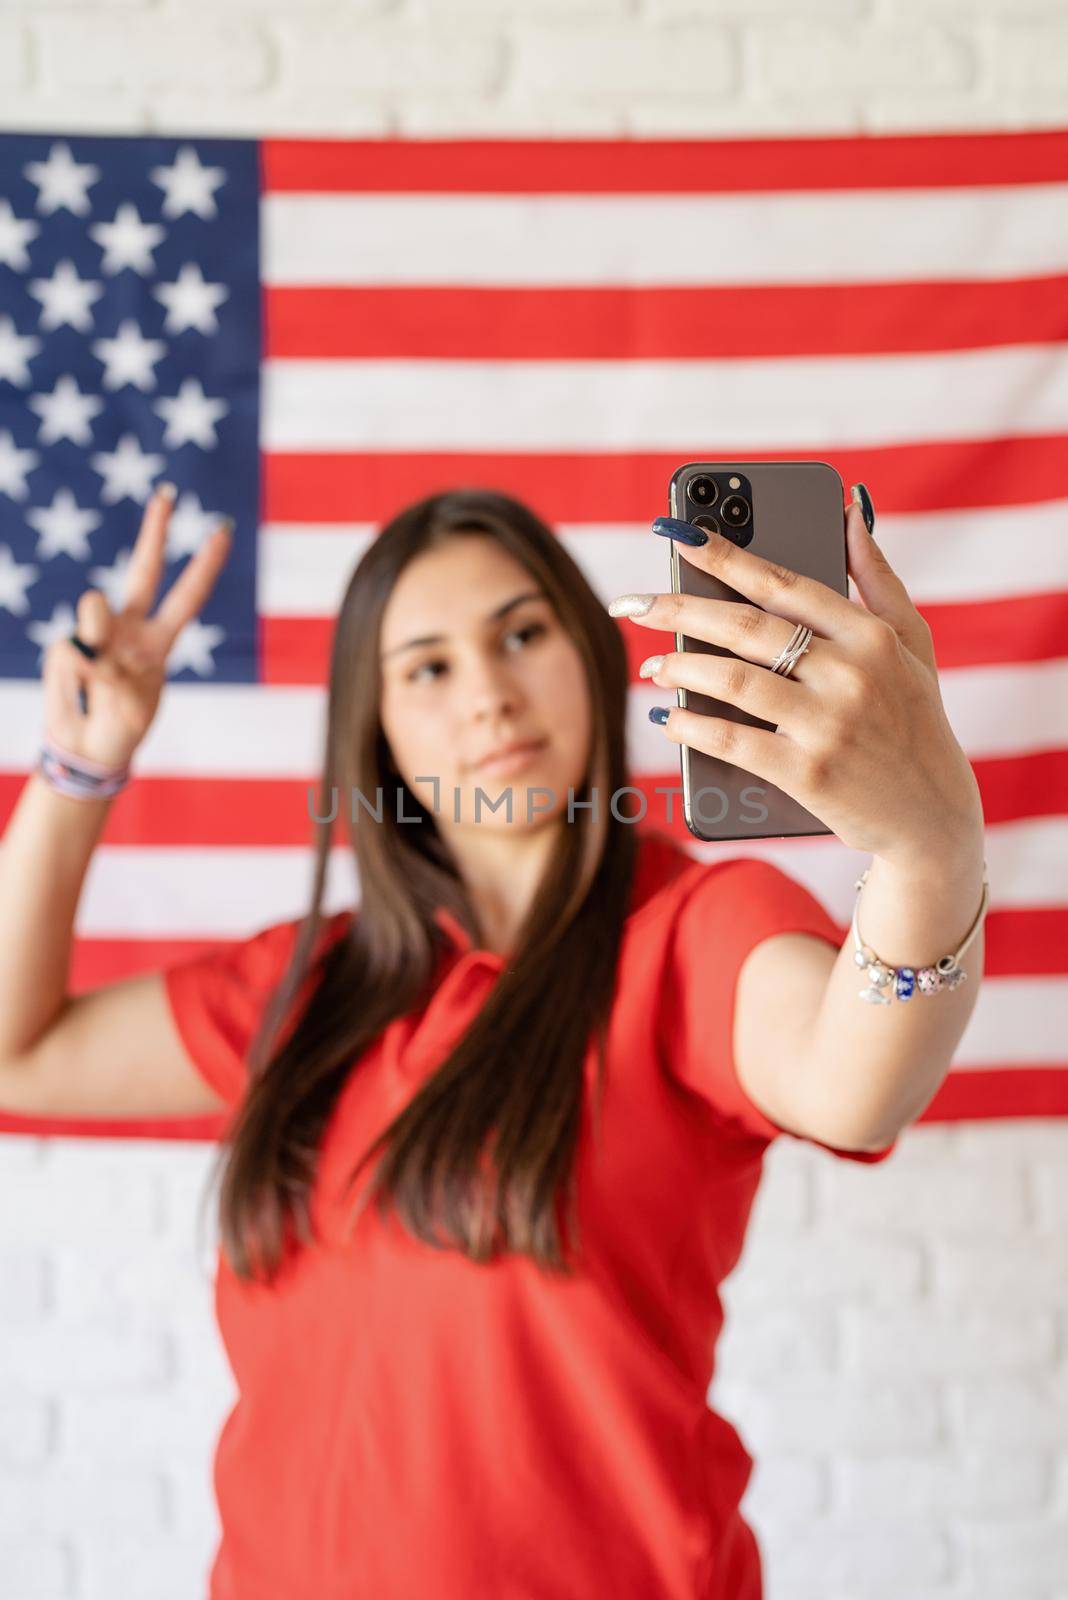 Independence day of the USA. Happy July 4th. Beautiful woman taking a selfie on the USA flag background